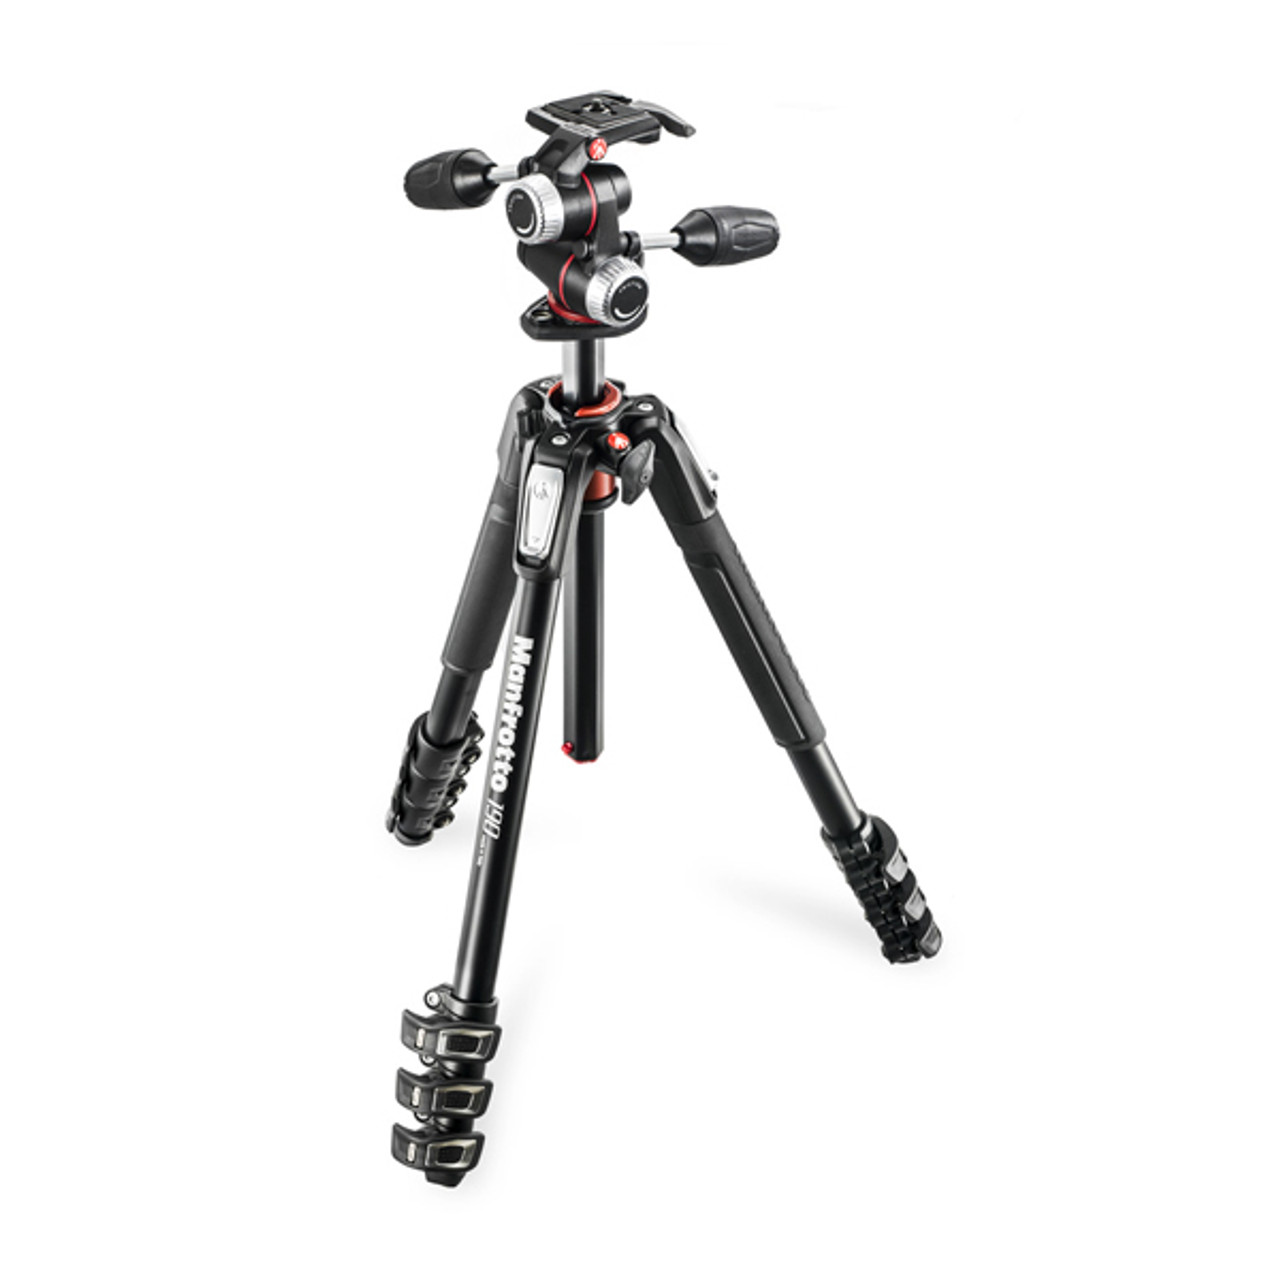 Manfrotto  MT190XPRO4 ALU TRIPOD 4-SECTION + MH190-3W 3-WAY HEAD